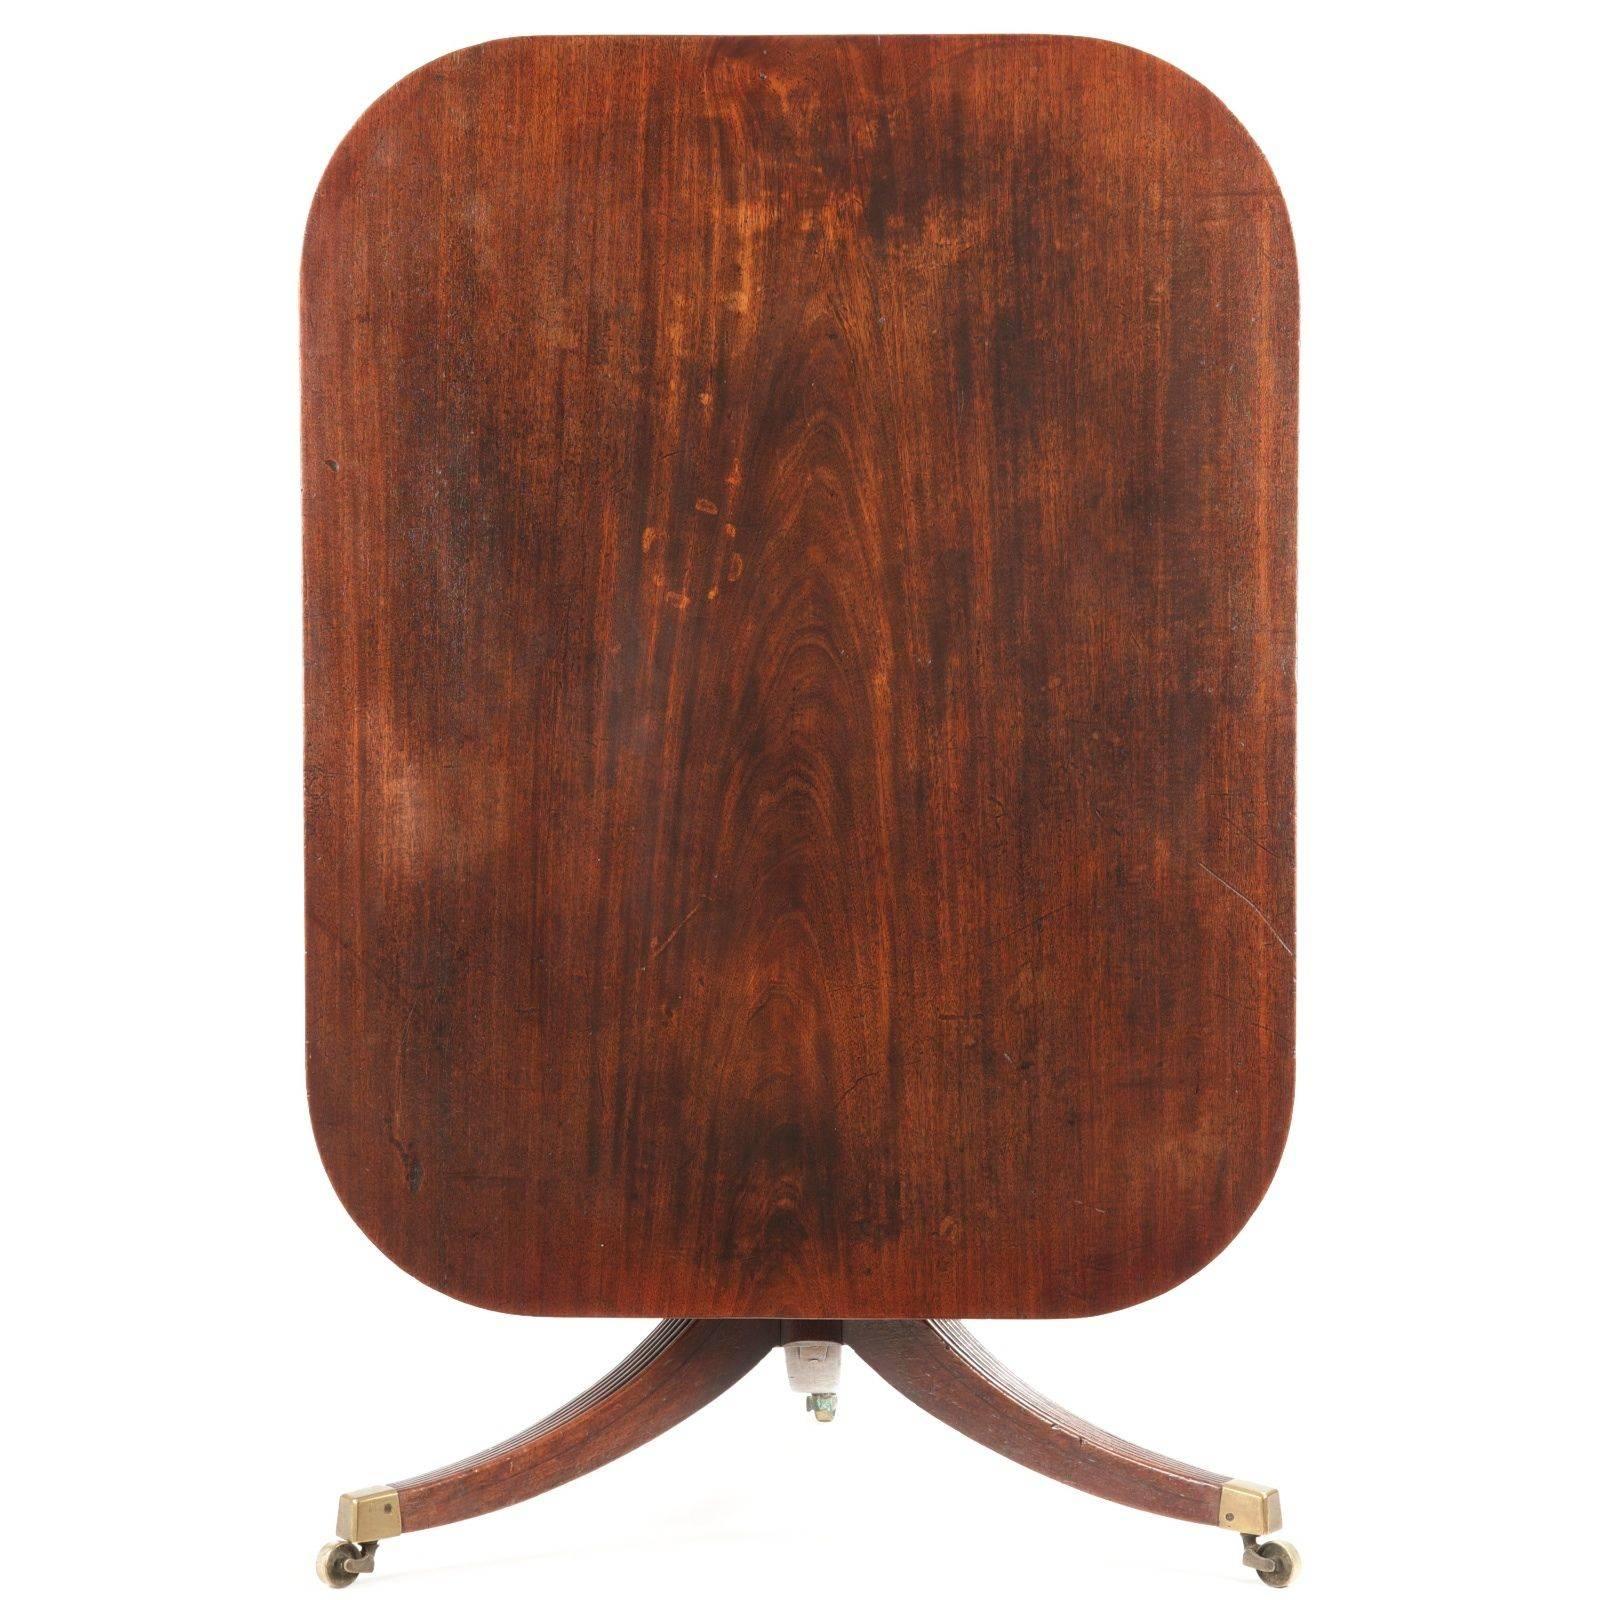 This fine antique breakfast table features a wonderful well patinated dark mahogany surface under many layers of later wax, the mellow hues very attractive on the solid mahogany top. An old and dense tree was used for this table top, the whole